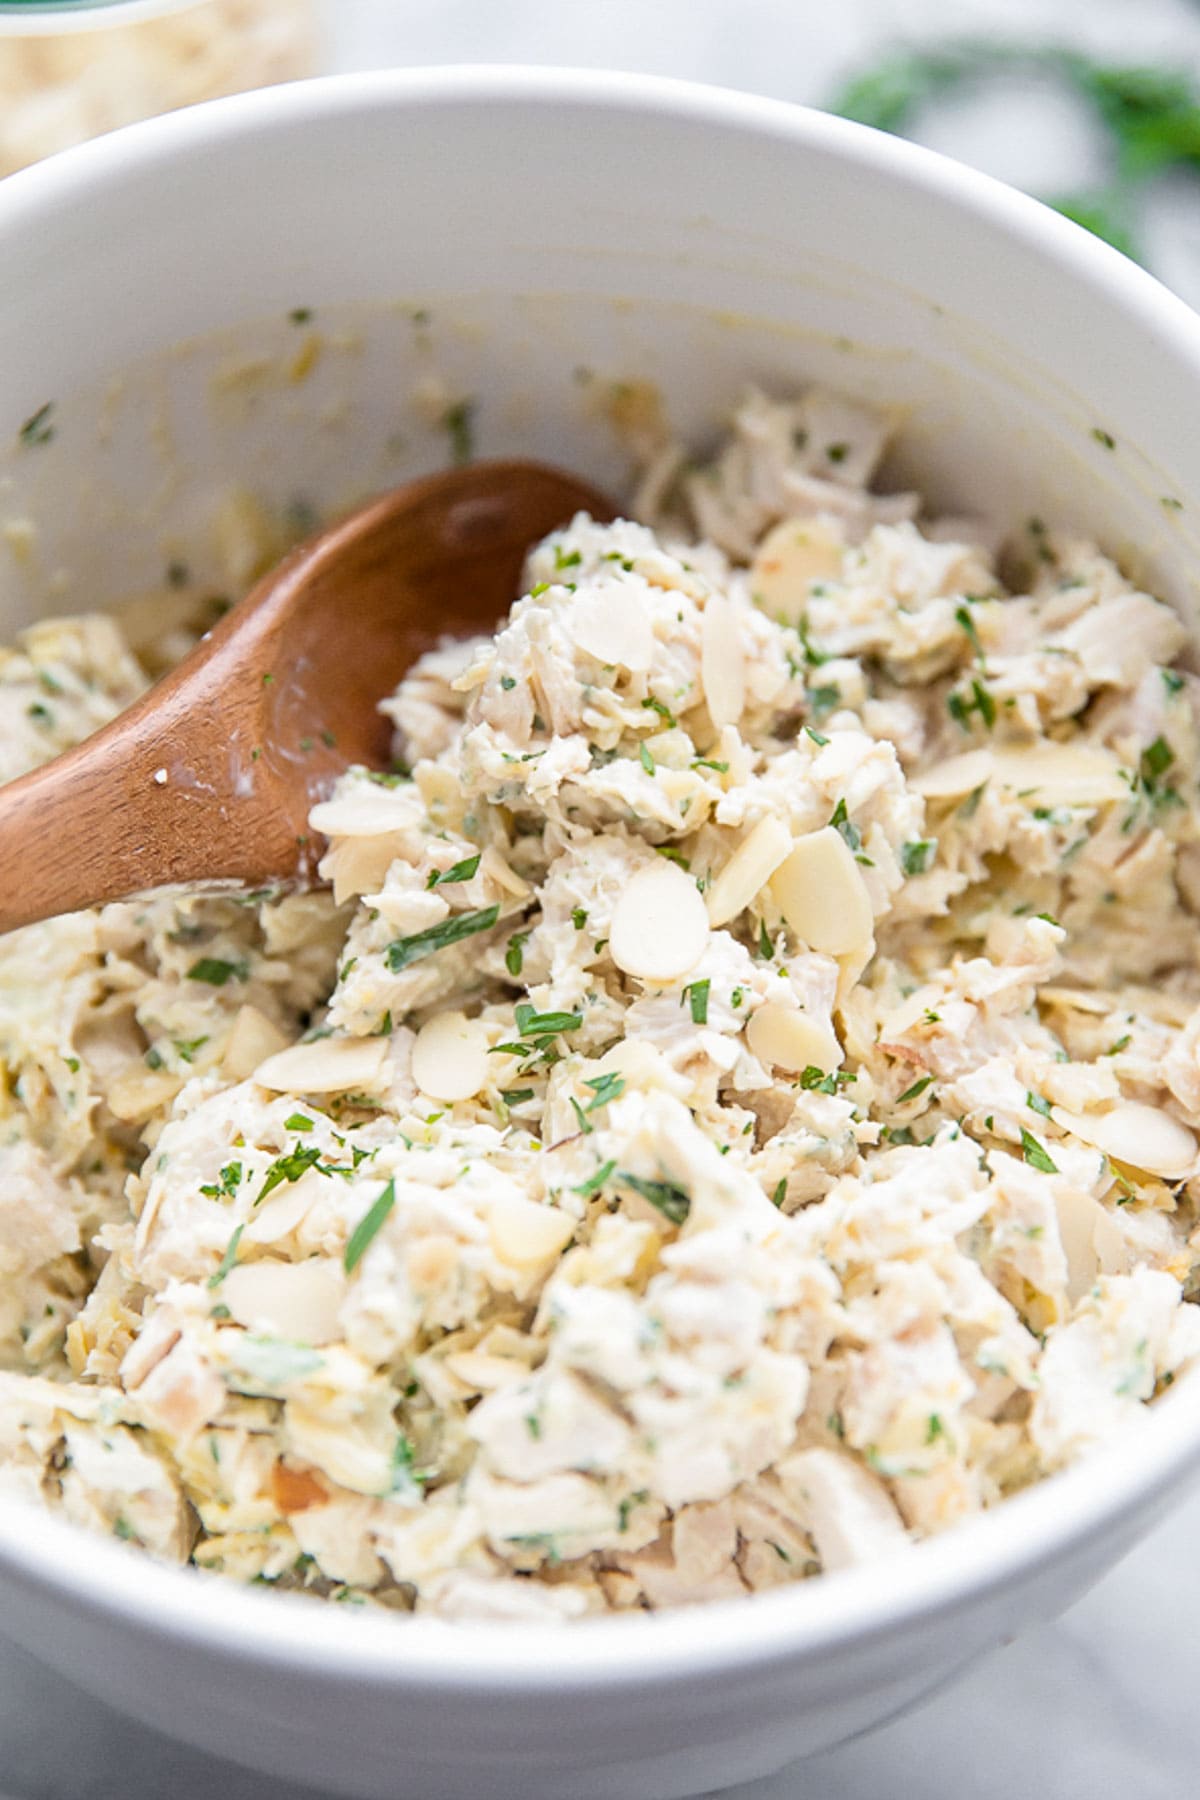 A bowl of tarragon chicken salad with slivered almonds.